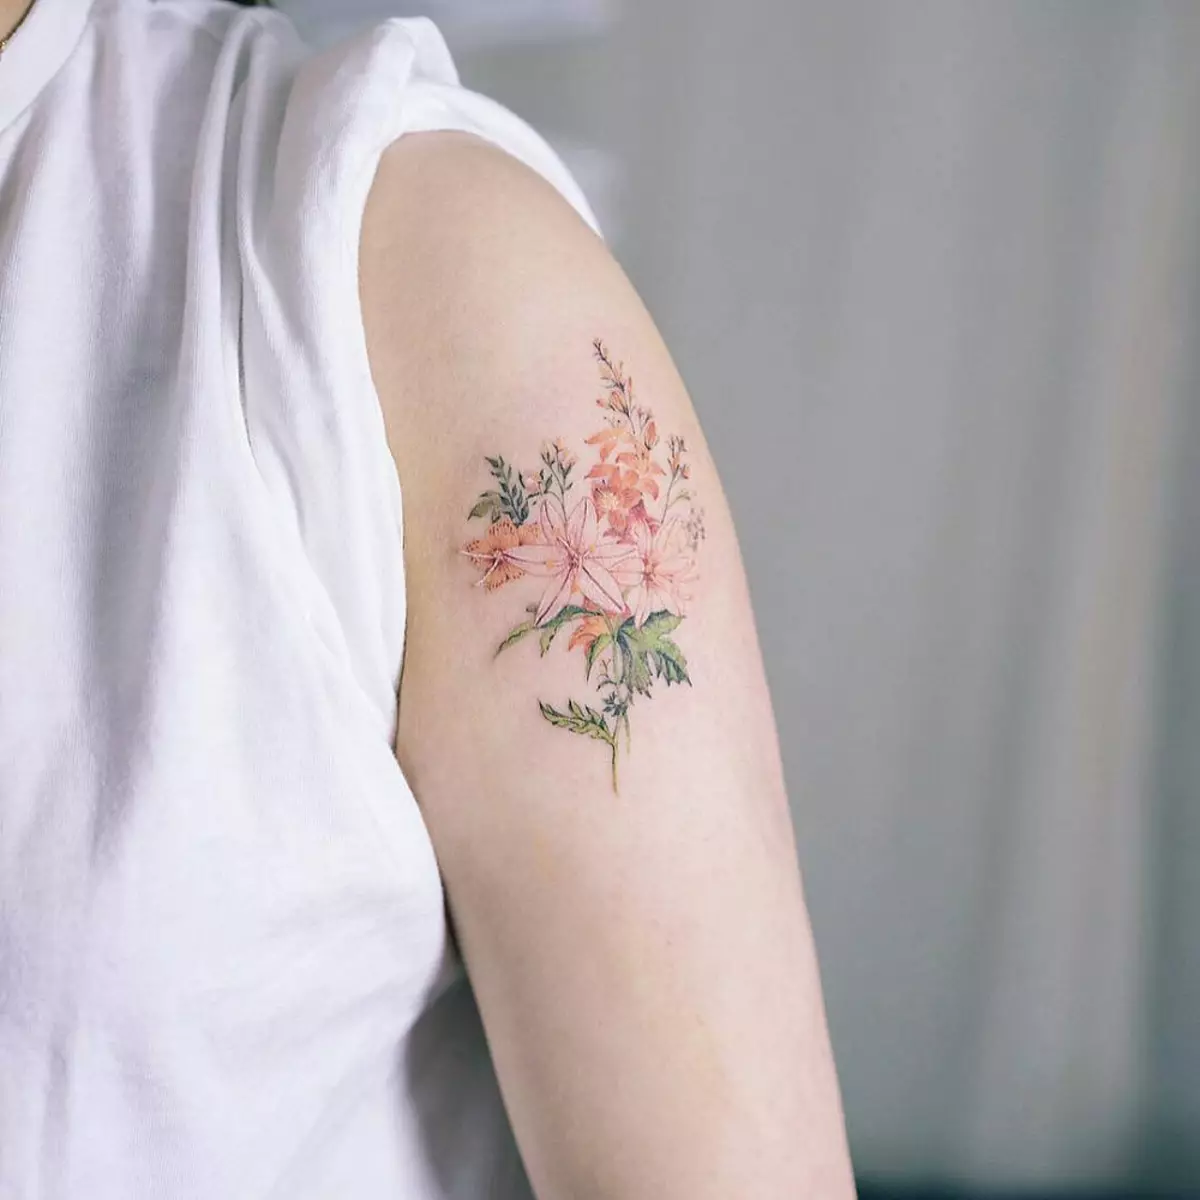 Tender tattoo: sketches for girls. Tattoos on hand and on shoulders, small and large. Gentle flowers and other feminine and sophisticated tattoos 282_6